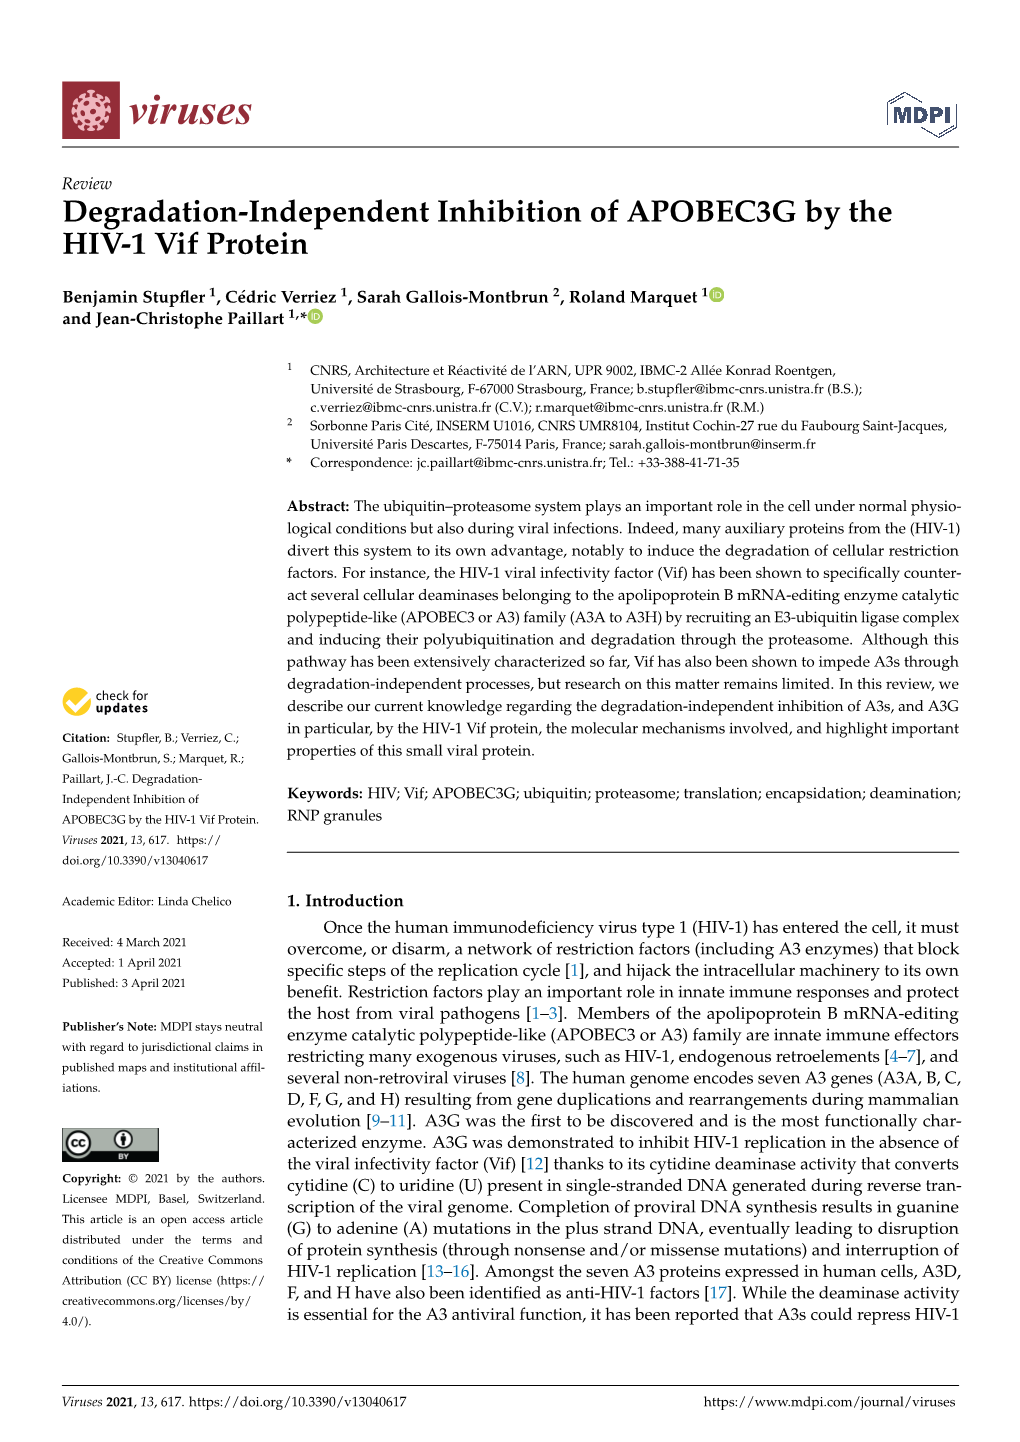 Degradation-Independent Inhibition of APOBEC3G by the HIV-1 Vif Protein